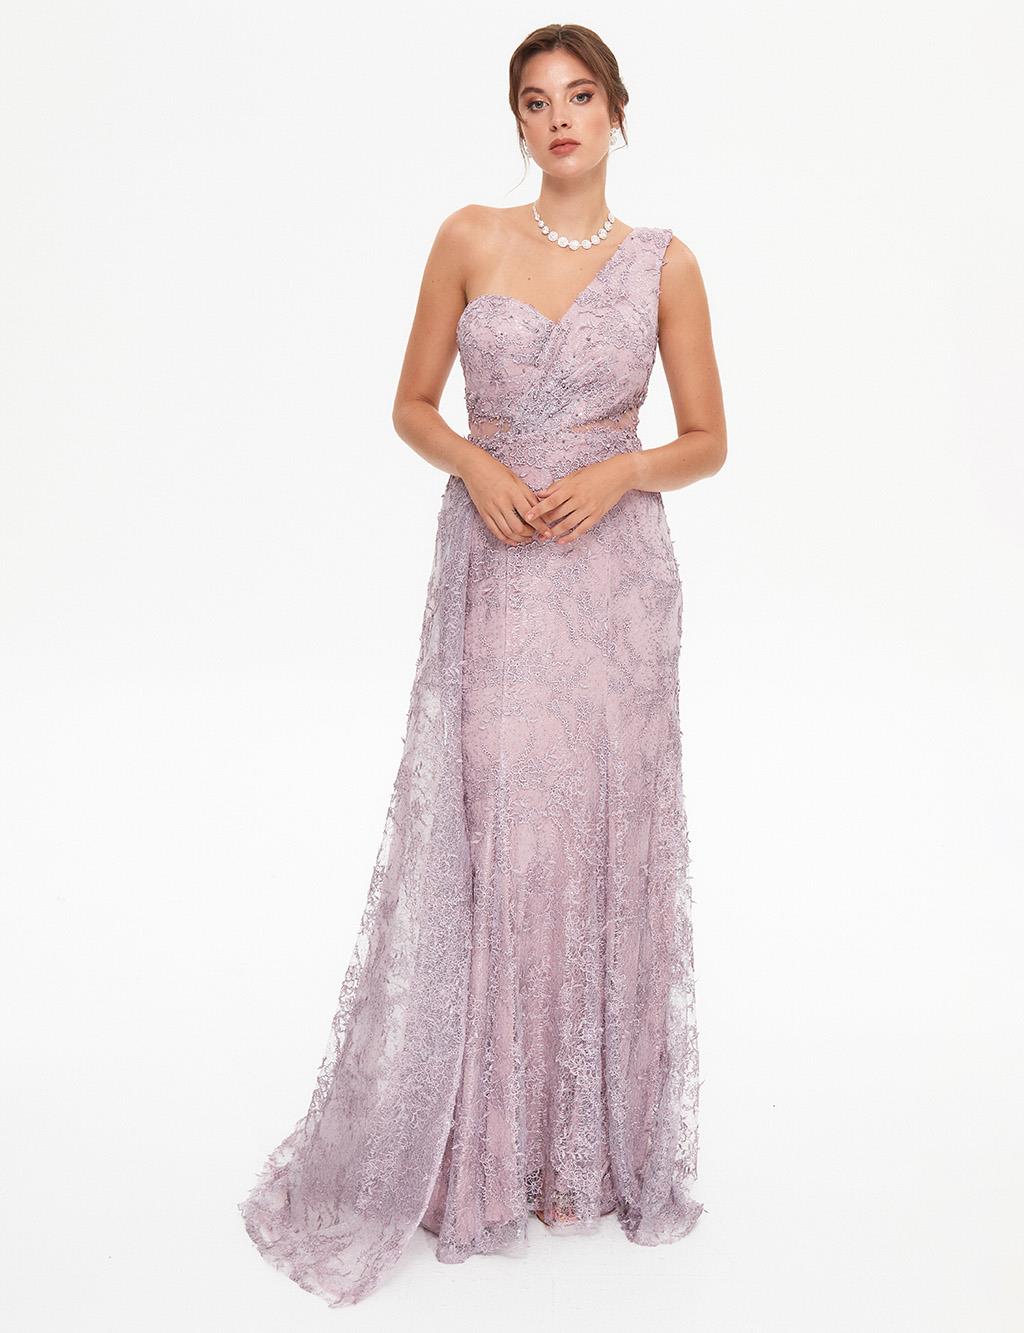 TIARA One Shoulder Dress With Cape Lilac